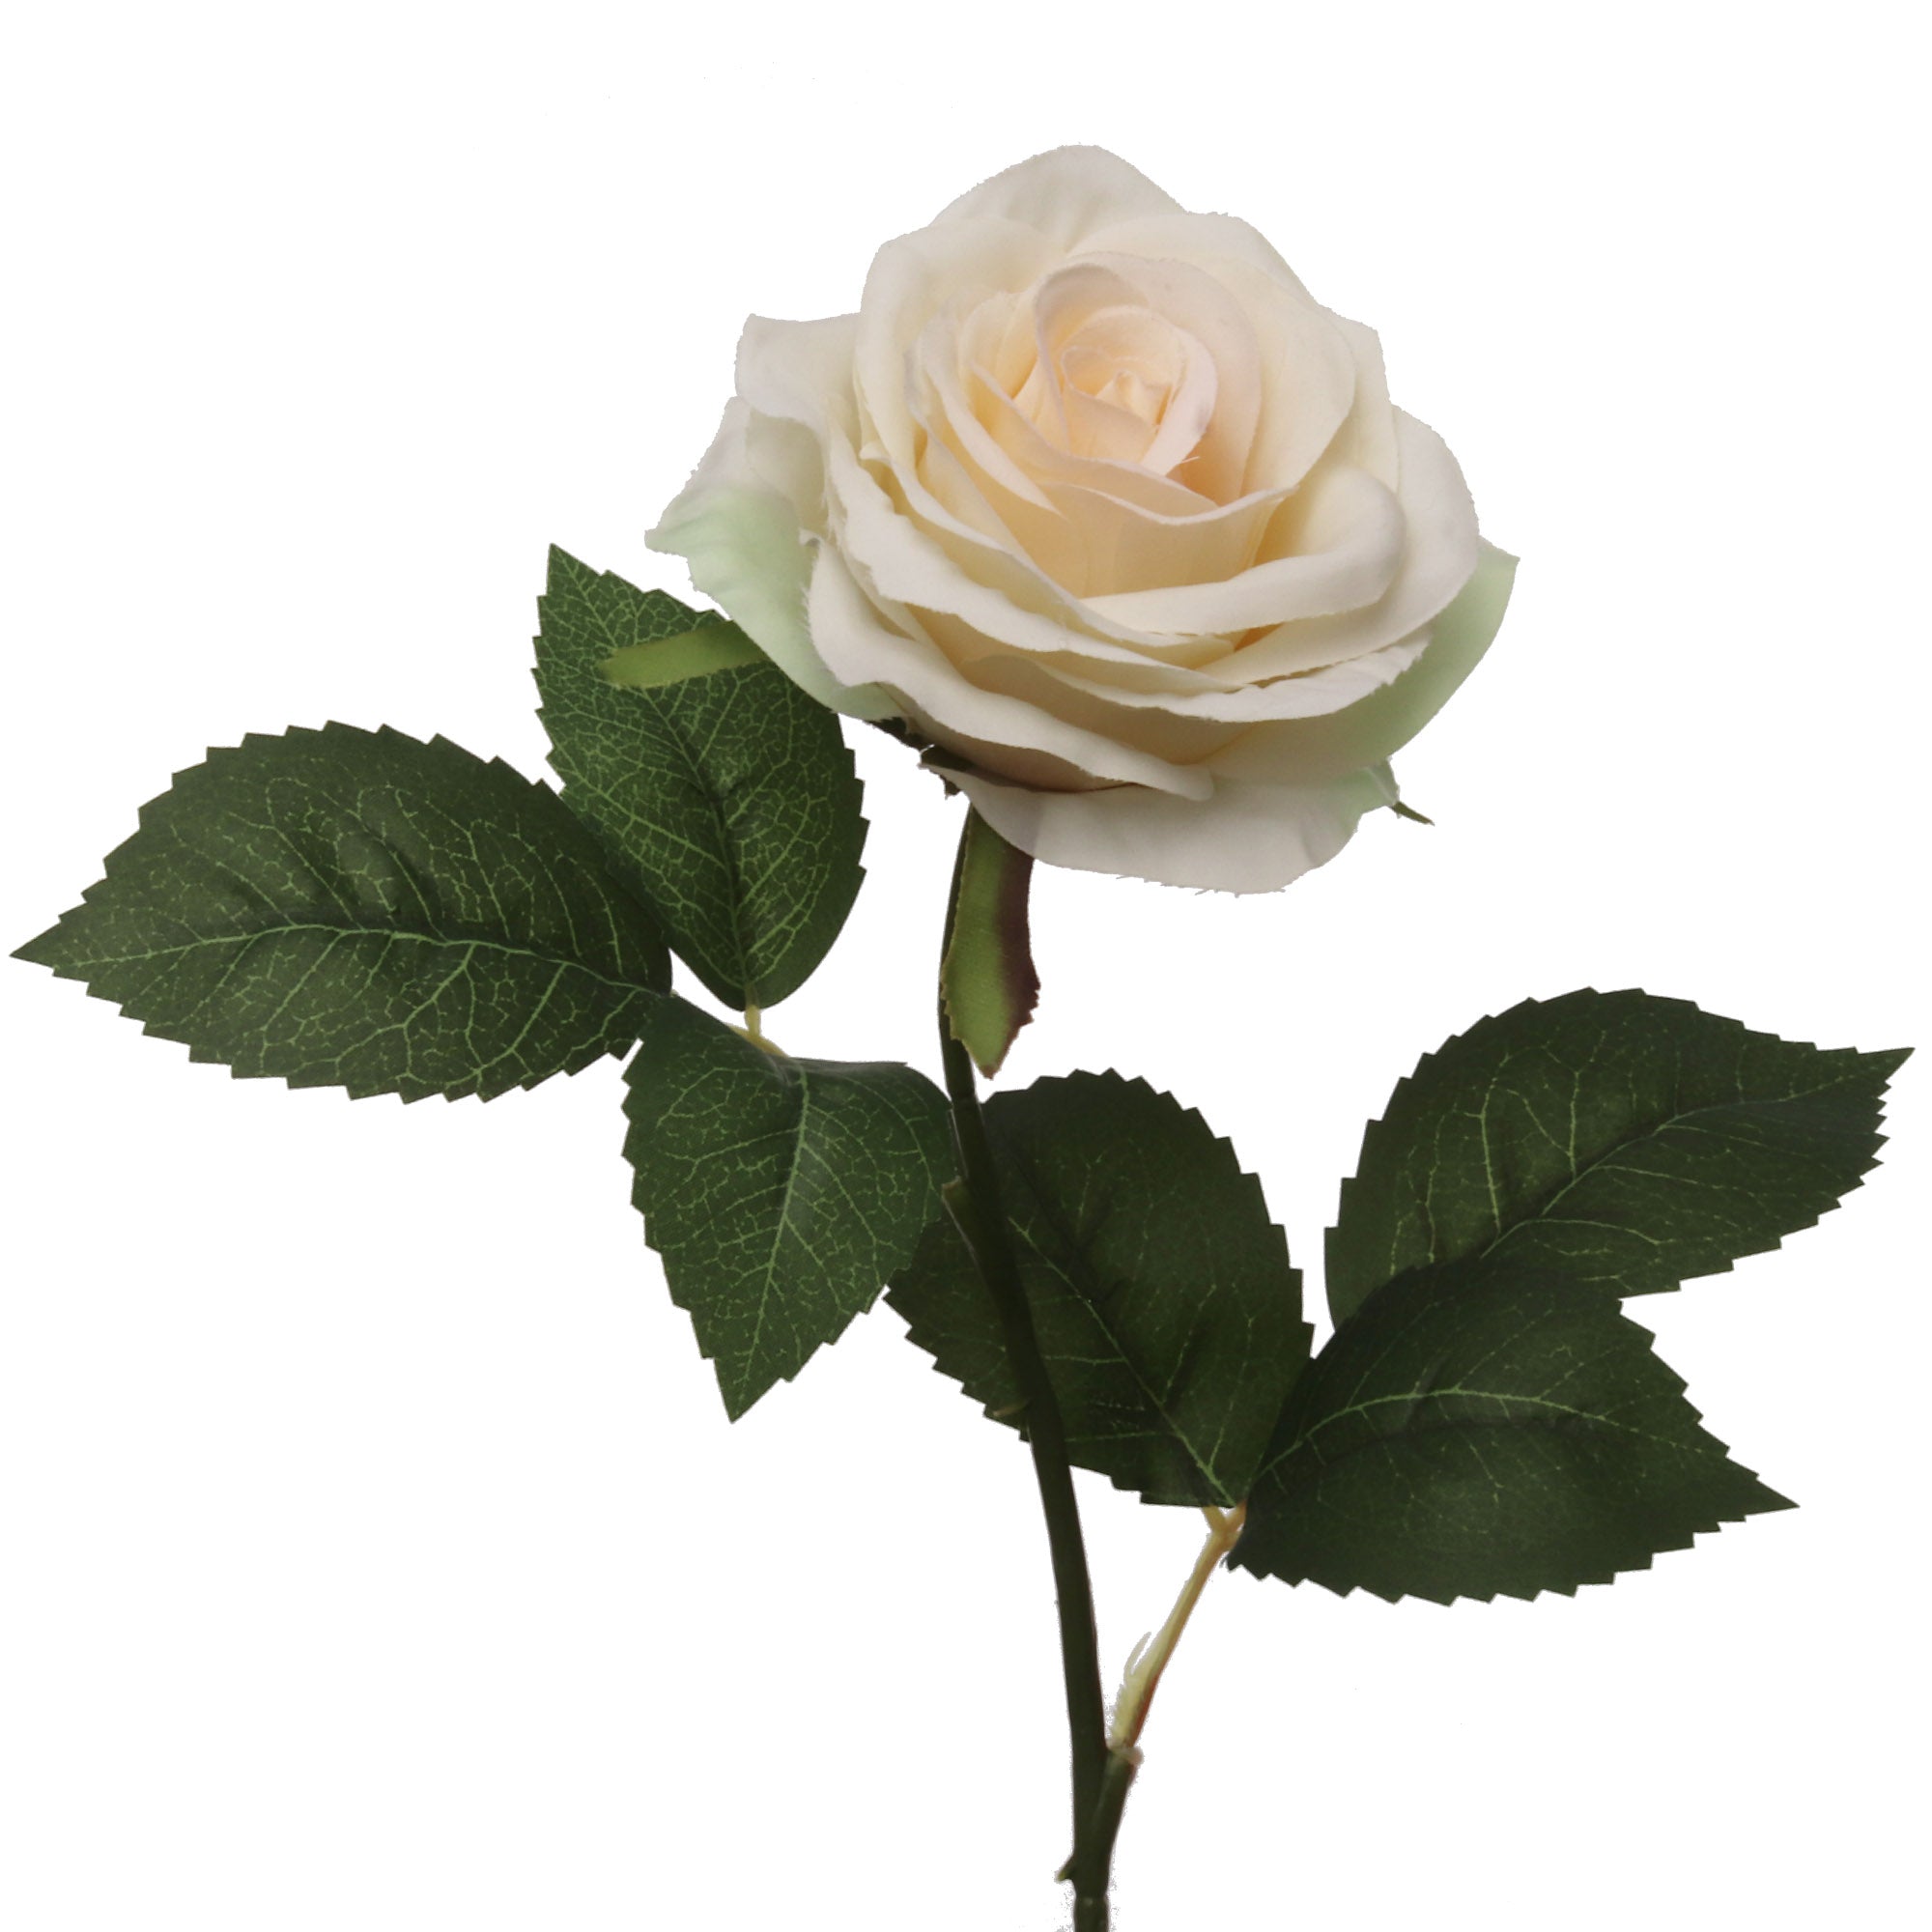 Stunning 20-inch Cream Open Rose with 4" Diameter - Perfect for Weddings, Home Decor, and More